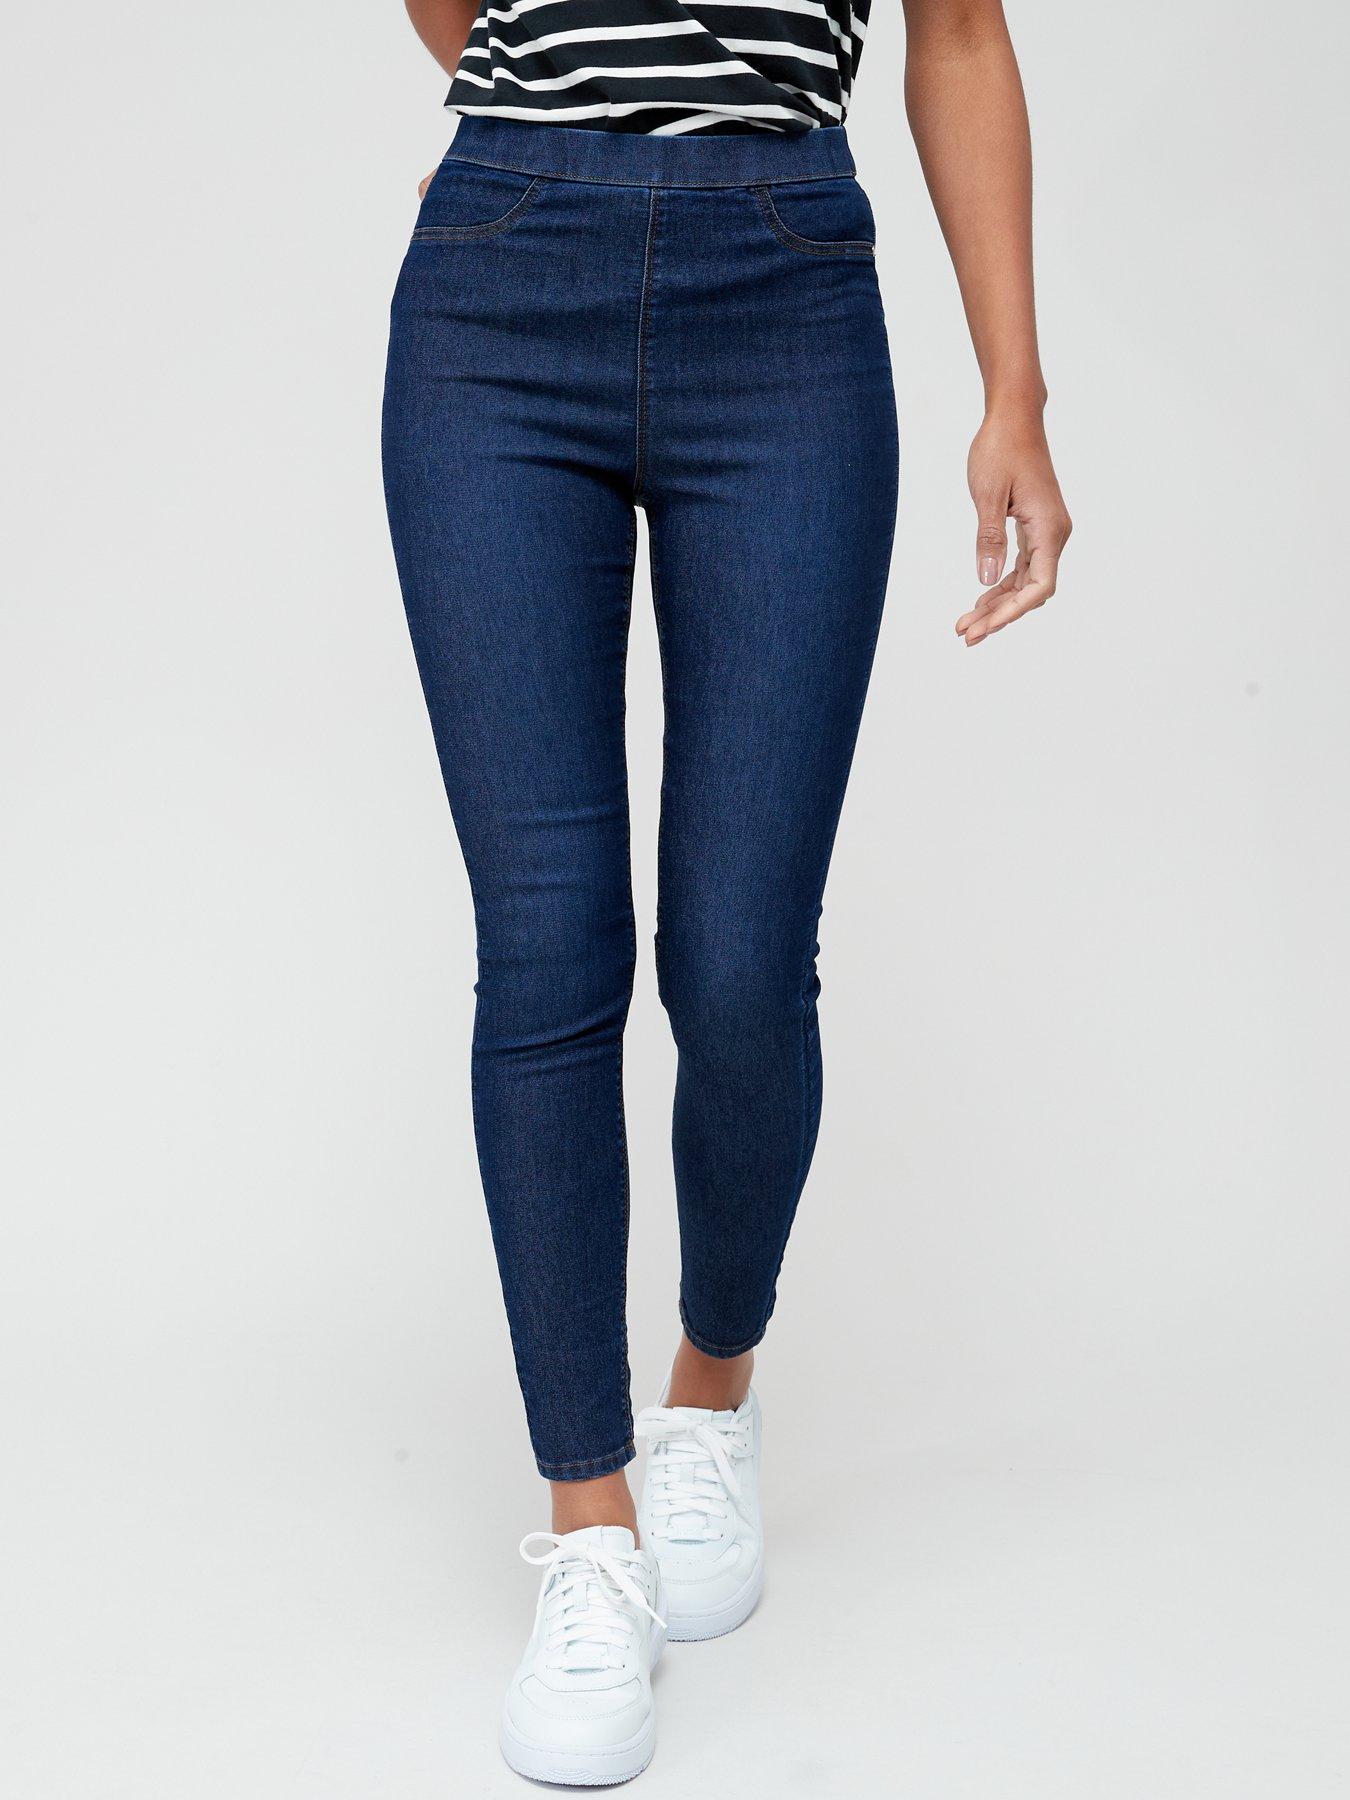 Democracy Women's Ab-solution Booty Lift Jeggings | Women's Jeans | Apparel  - Shop Your Navy Exchange - Official Site